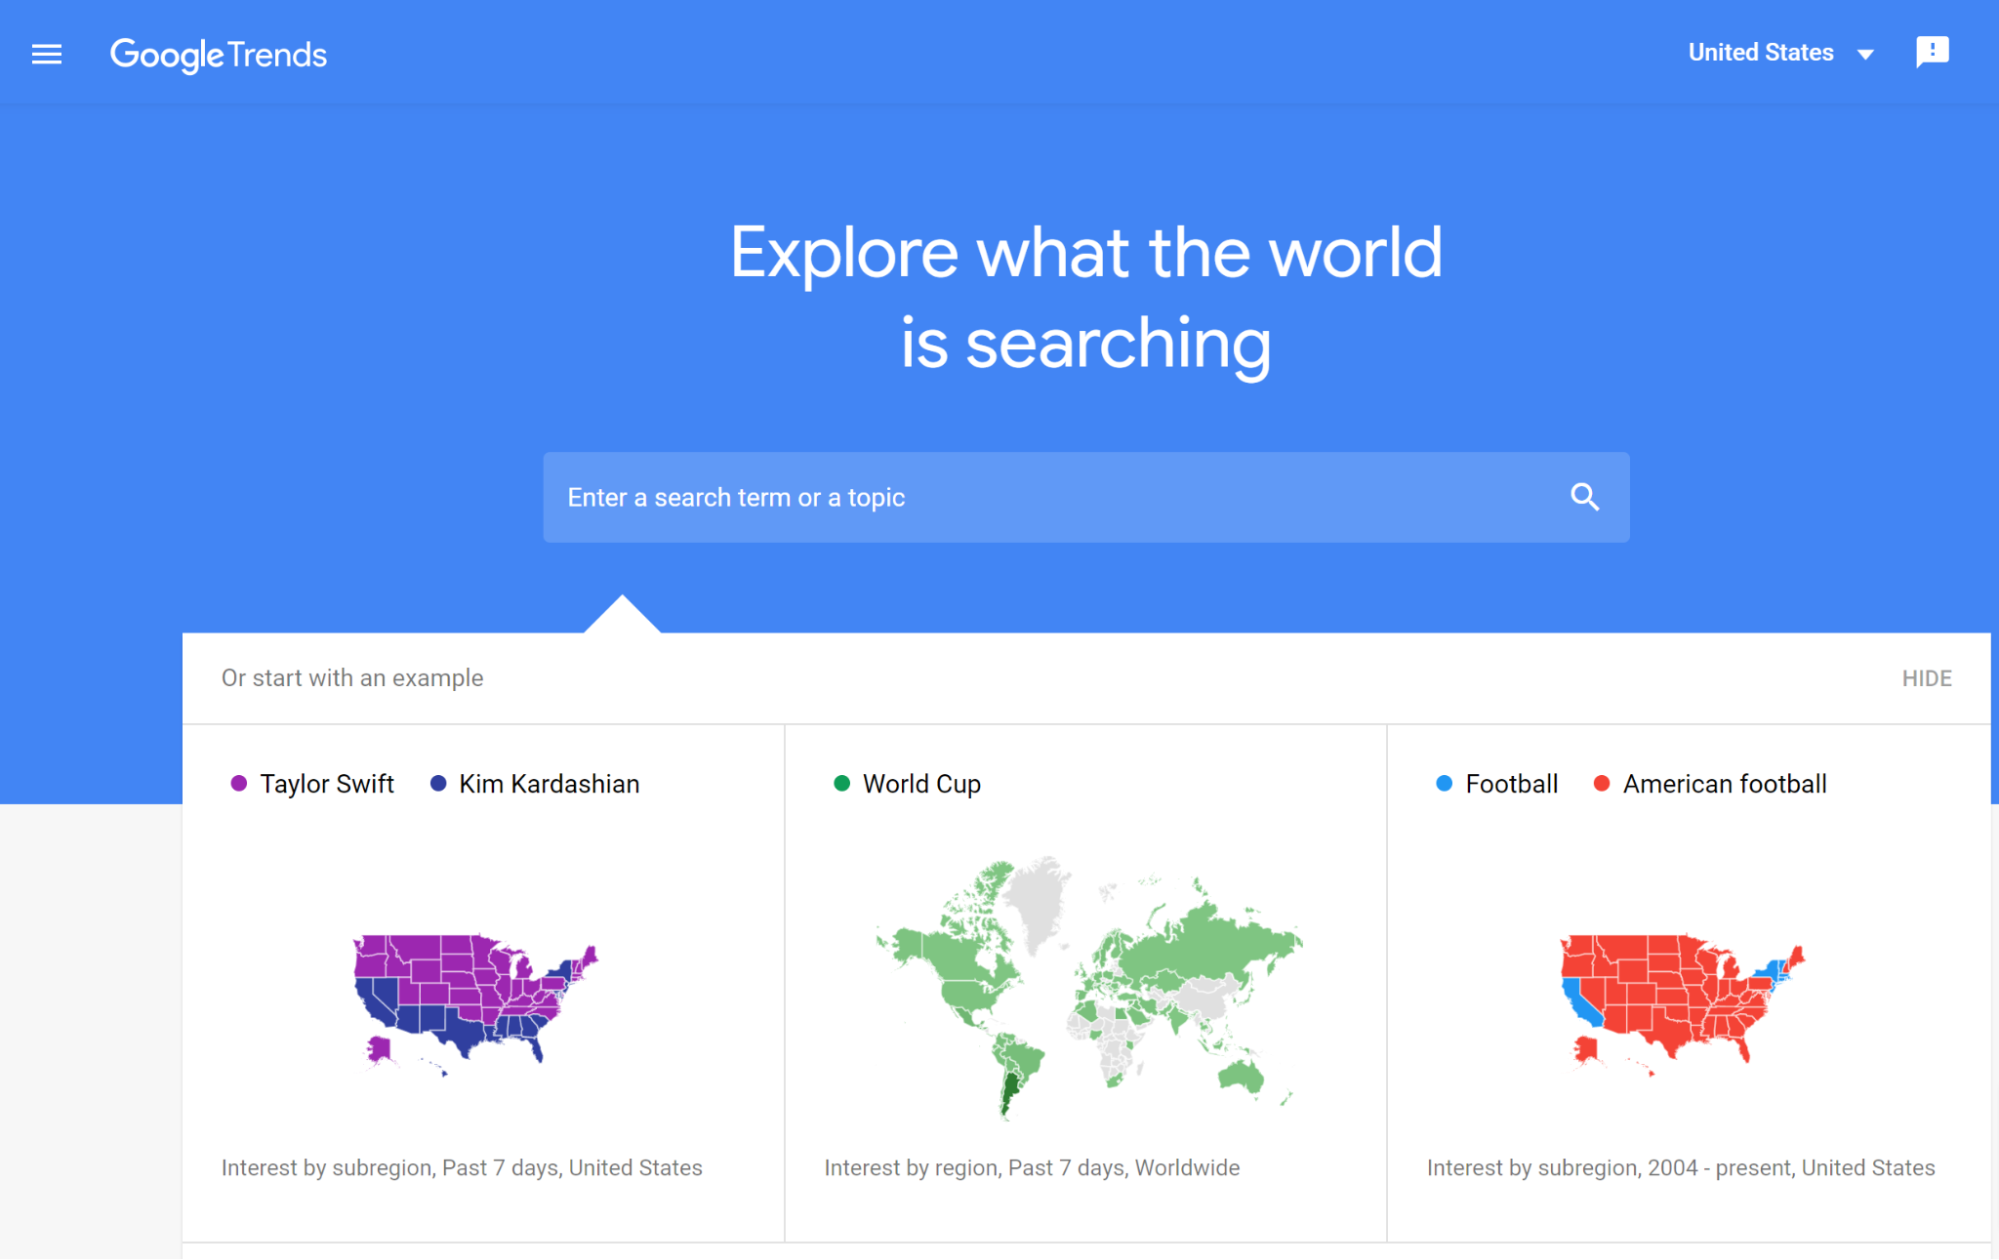 Google Trends search bar suggests popular queries like Taylor Swift in USA or the World Cup globally.